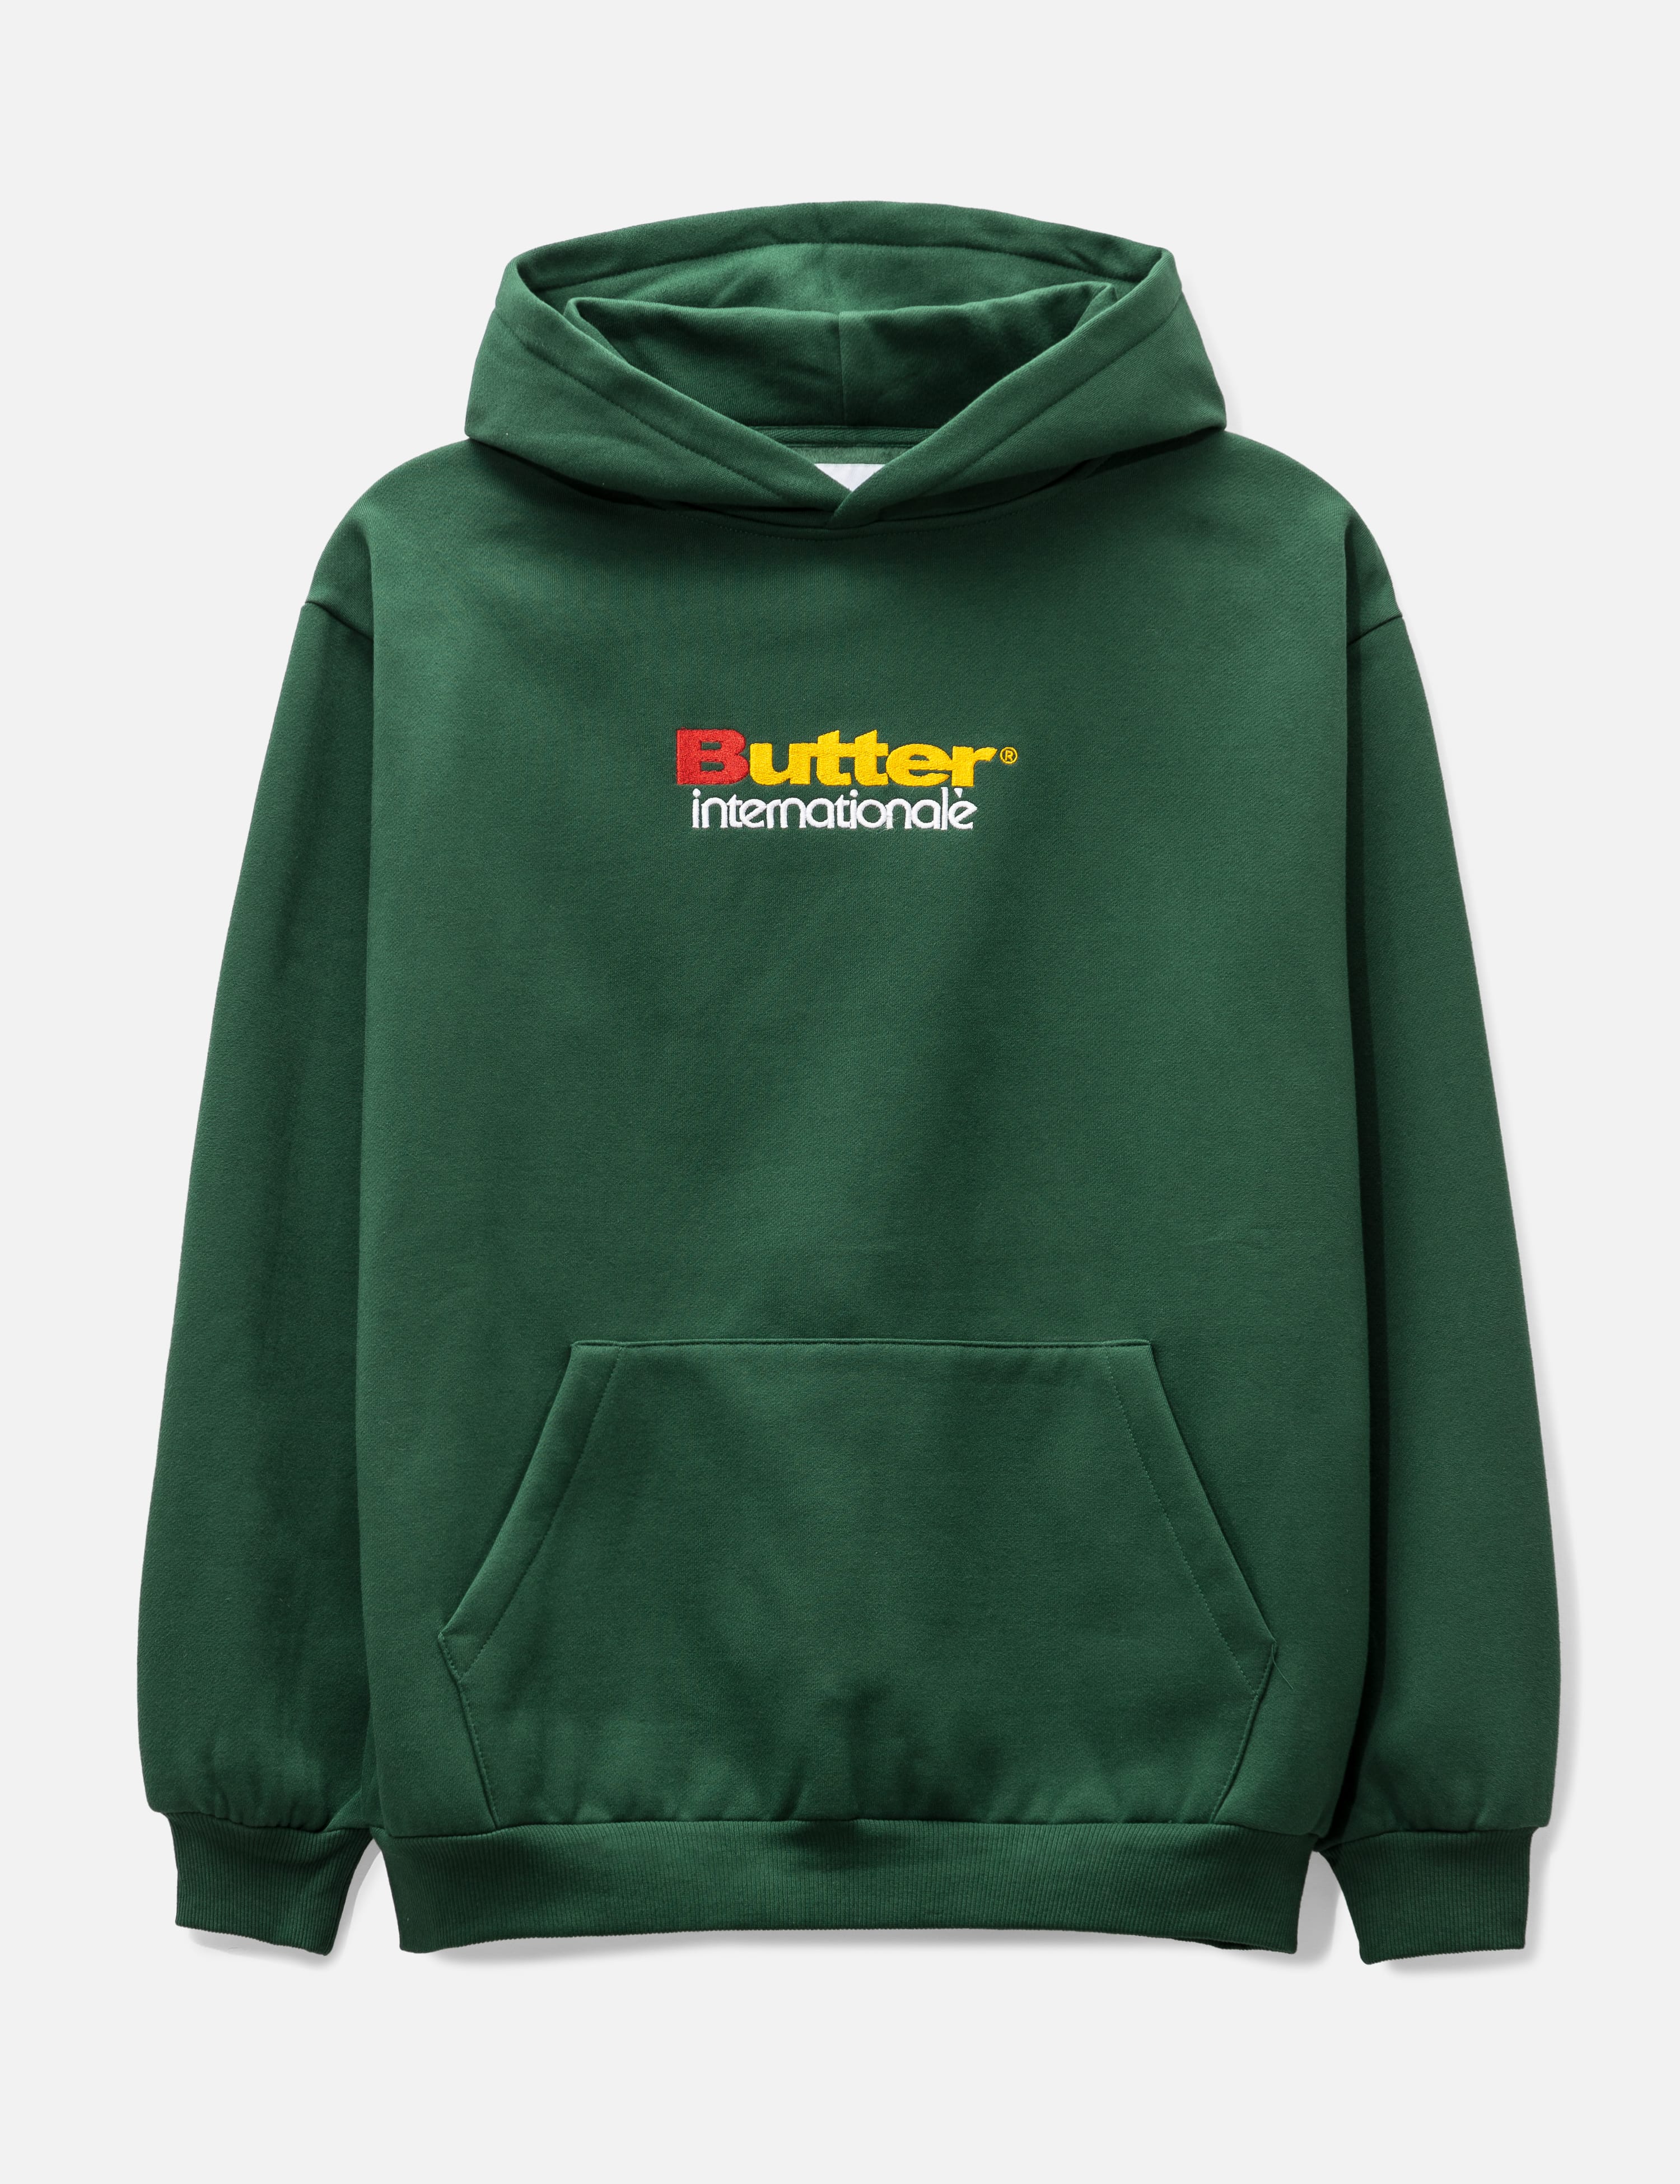 Butter Goods - Internationale Embroidered Hoodie | HBX - Globally